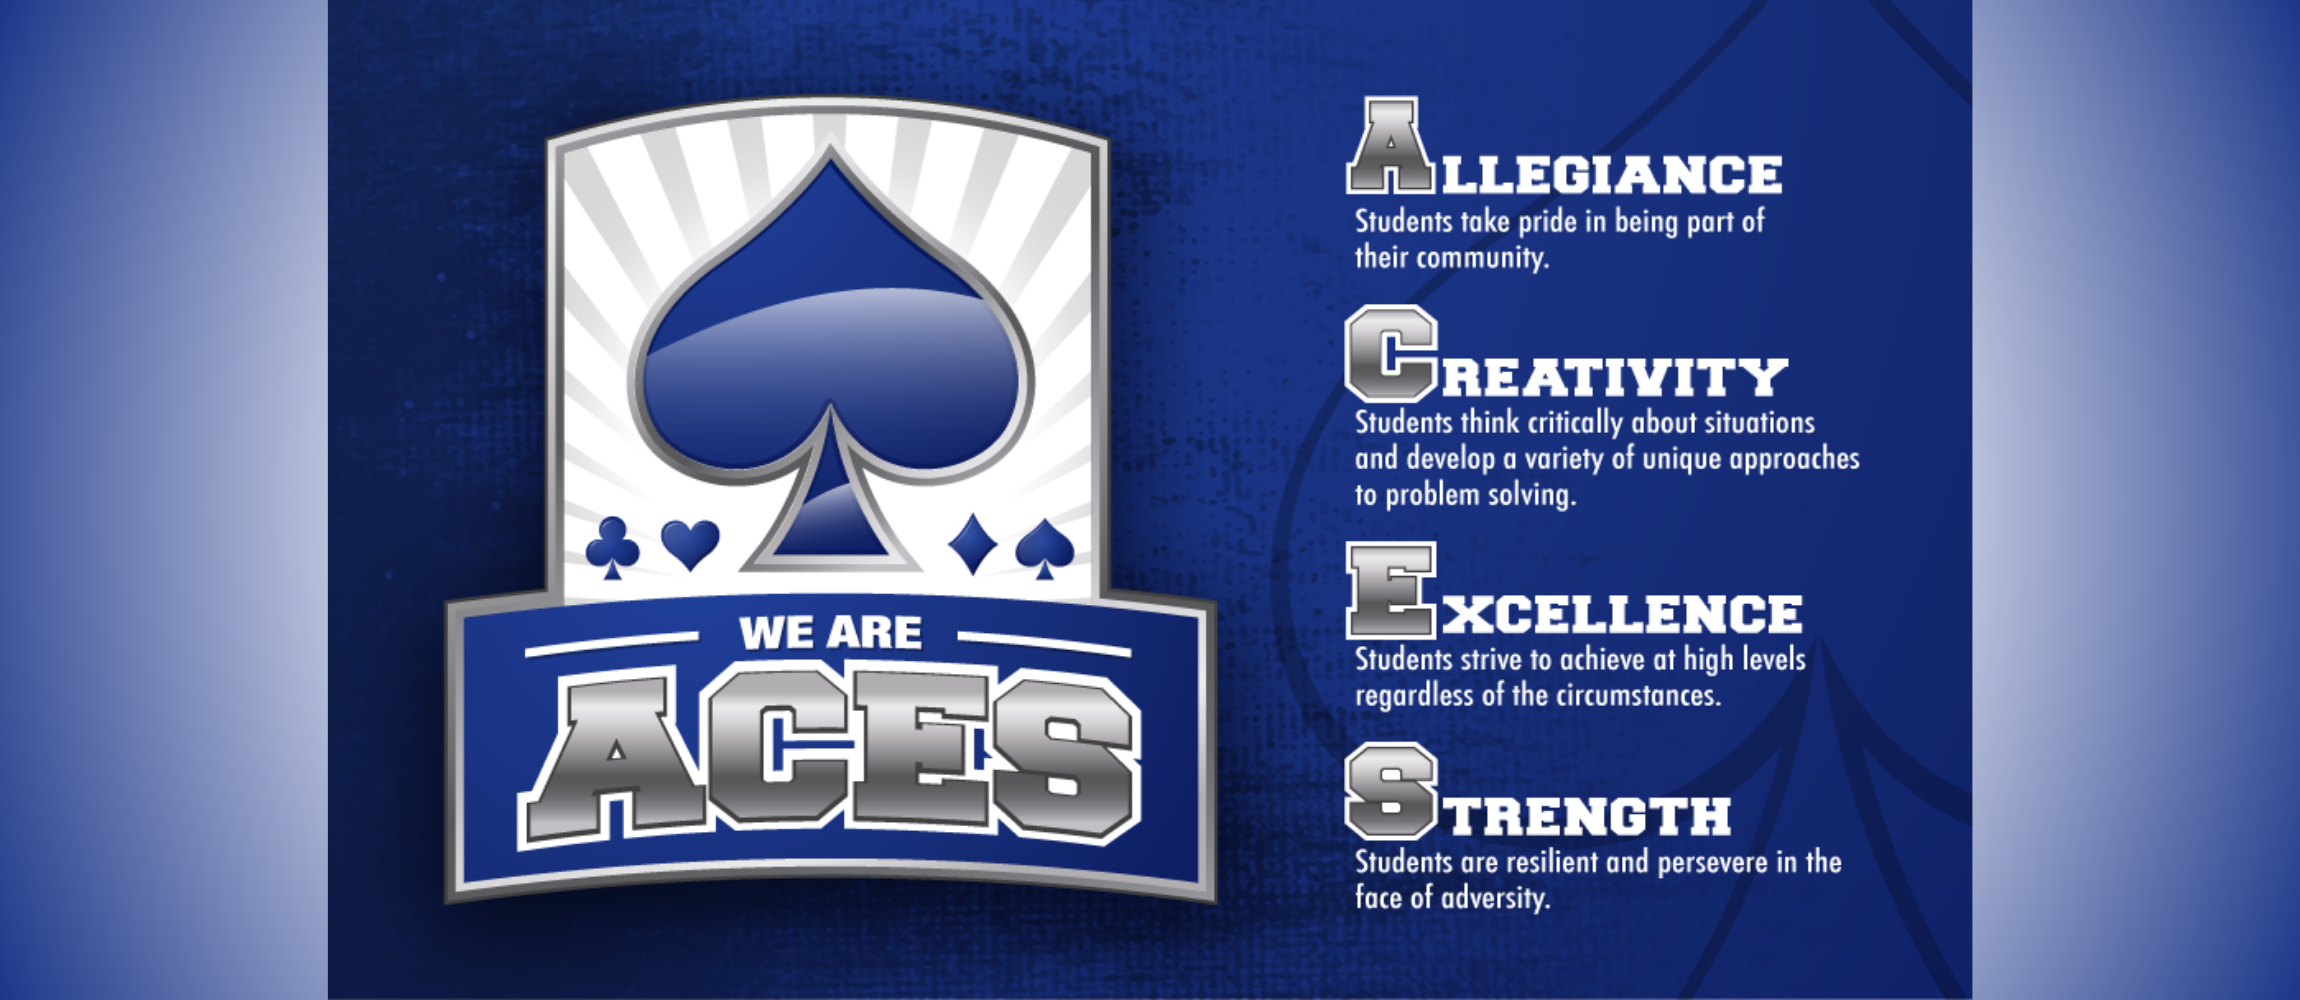 We are Aces Allegiance students take pride in being part of their community. Creativity students think critically about situations and develop a variety of unique approaches to problem solve. Excellence students strive to achieve at high levels regardless of the circumstances. Stregth students are resilient and perserver in the face of adversity. 